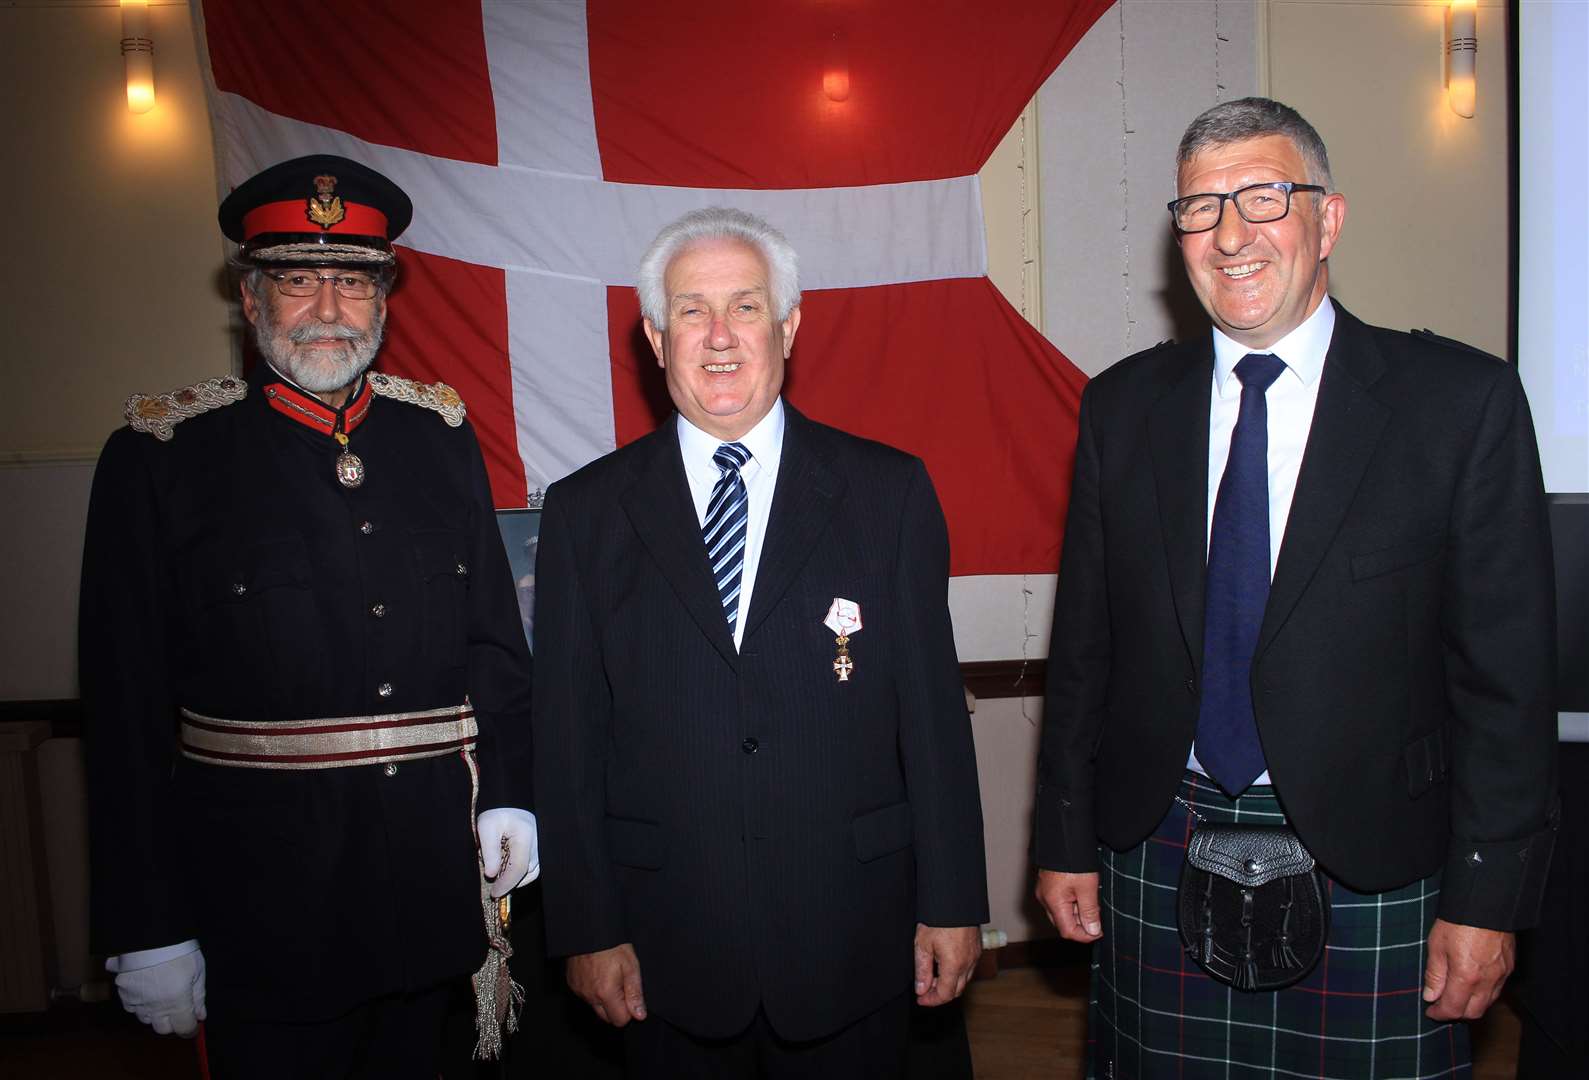 Malcolm Bremner (centre) after receiving the Knight’s Cross of First Class of the Order of Dannebrog, with the Lord-Lieutenant of Caithness, Lord Thurso, and Vice-Lieutenant Willie Watt. Picture: Alan Hendry